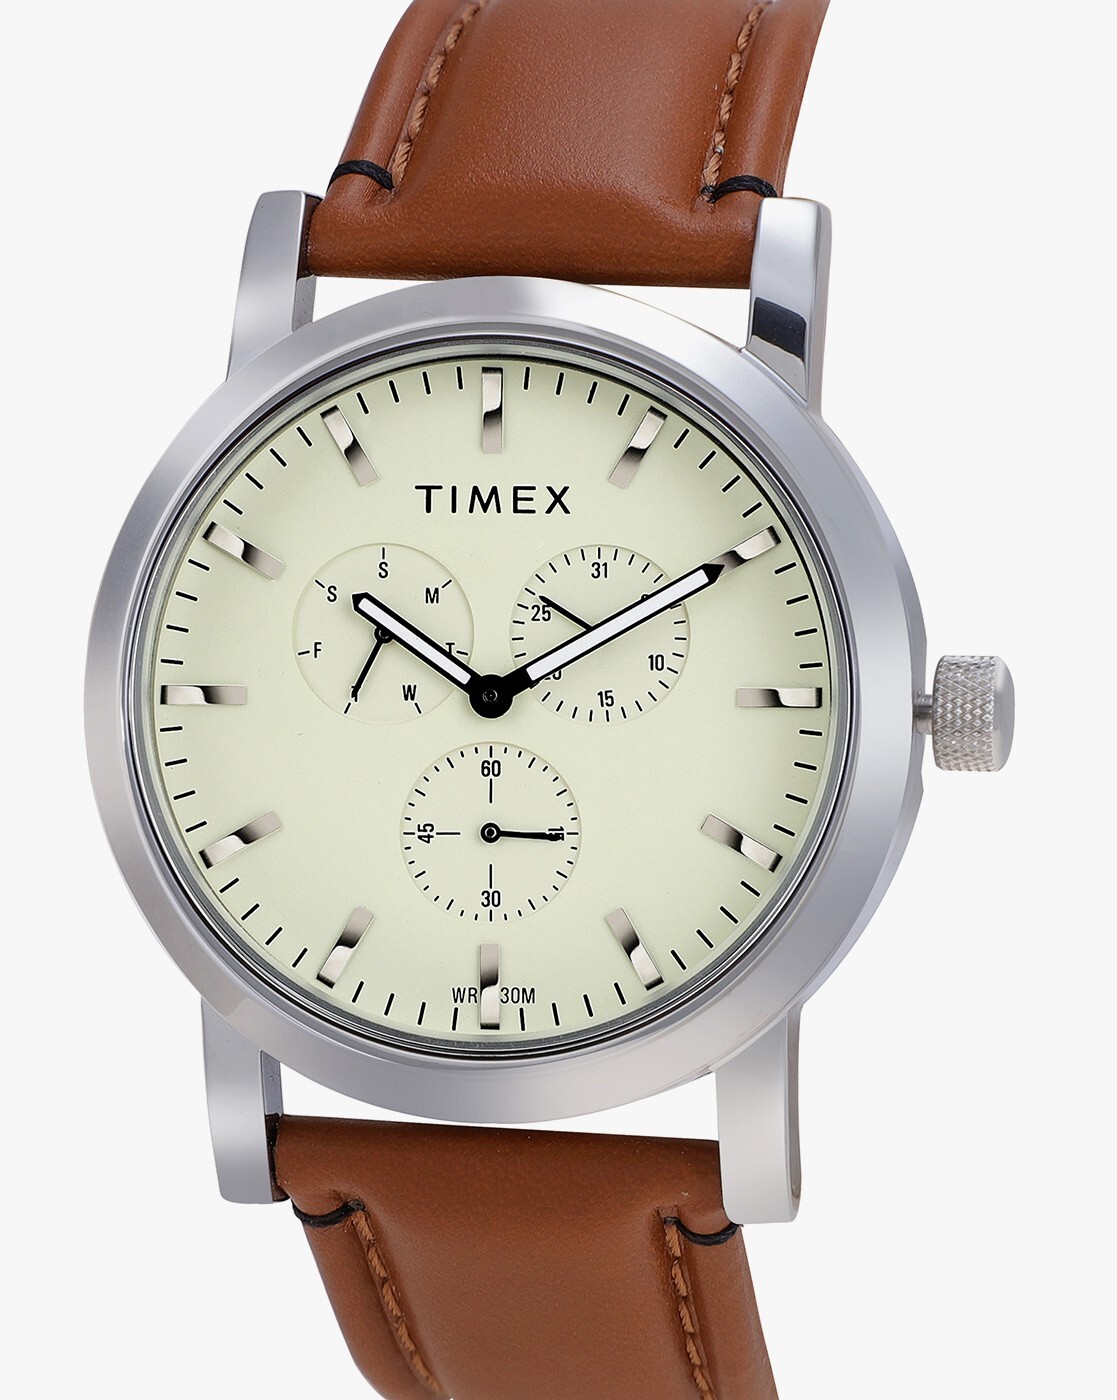 Share more than 115 timex watches best